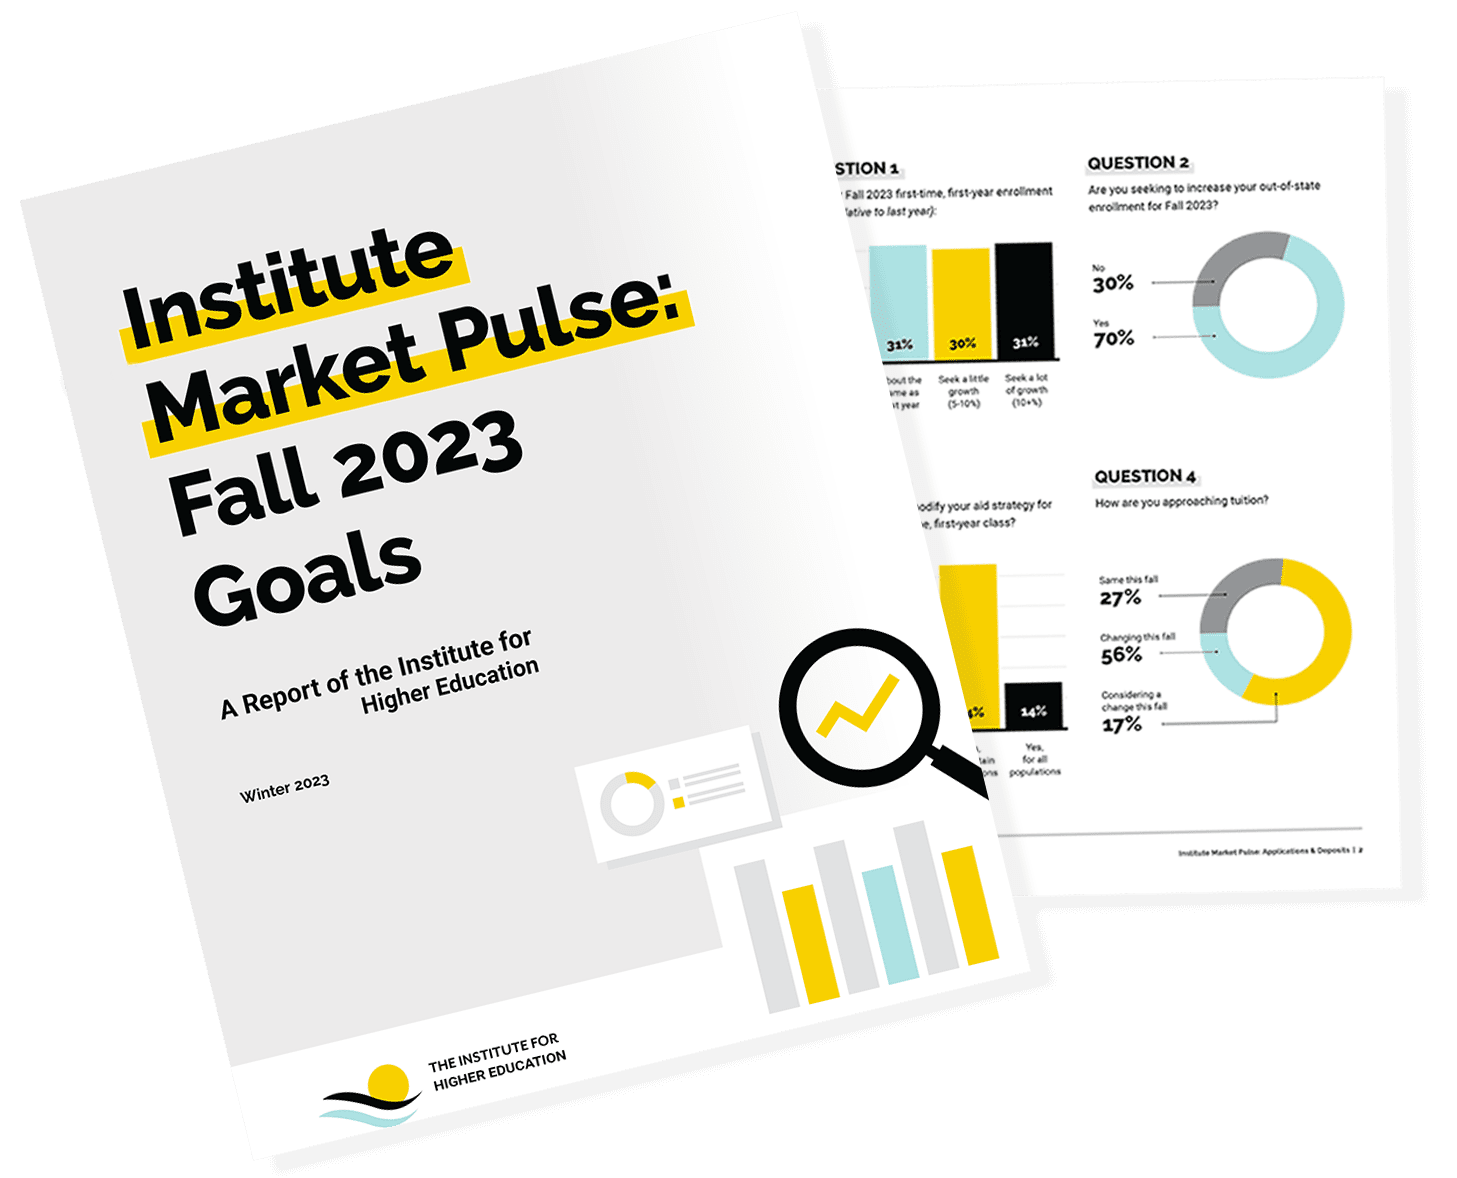 Institute Market Pulse: Fall 2023 Goals is now available for download!  